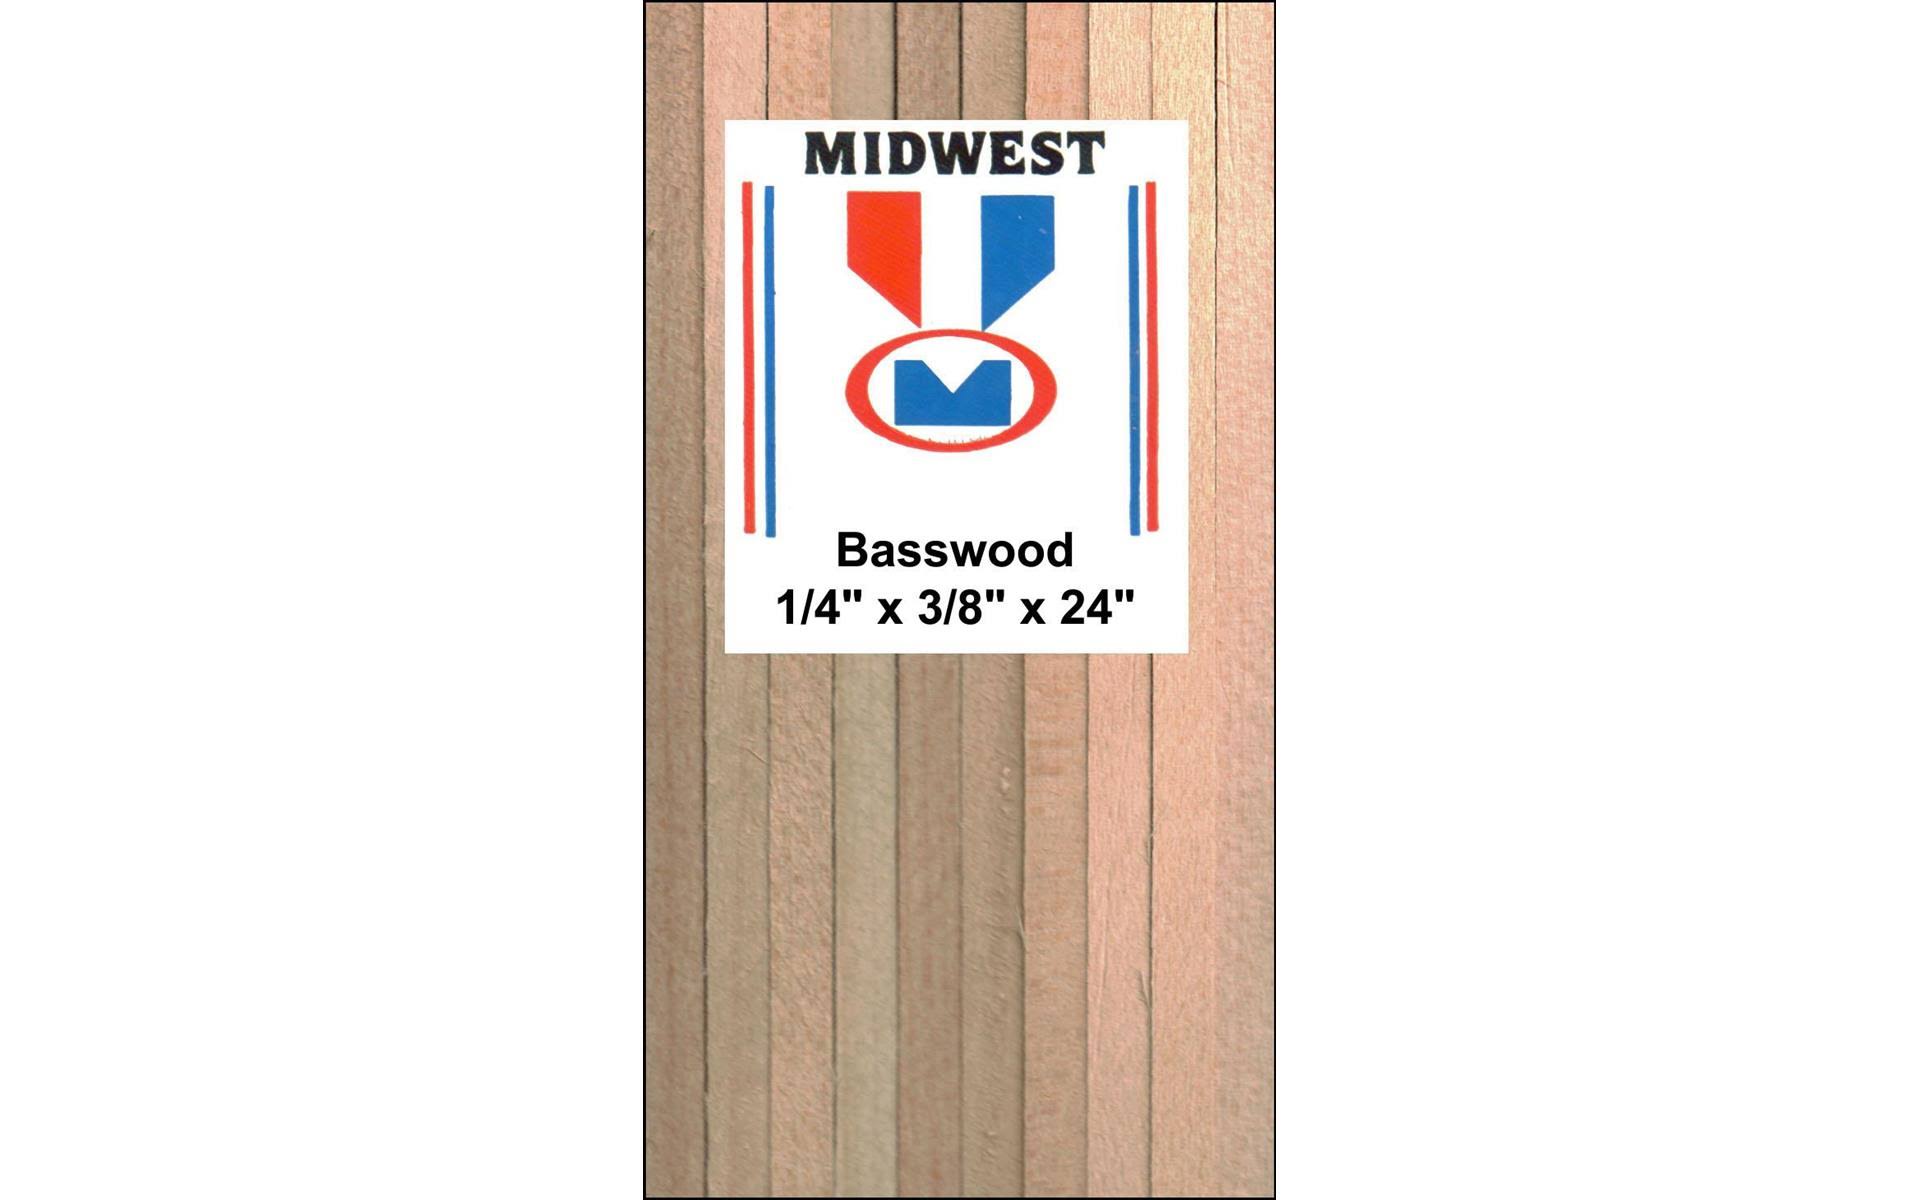 Midwest Basswood 1/4 x 3/8 x 24 (16) 4068